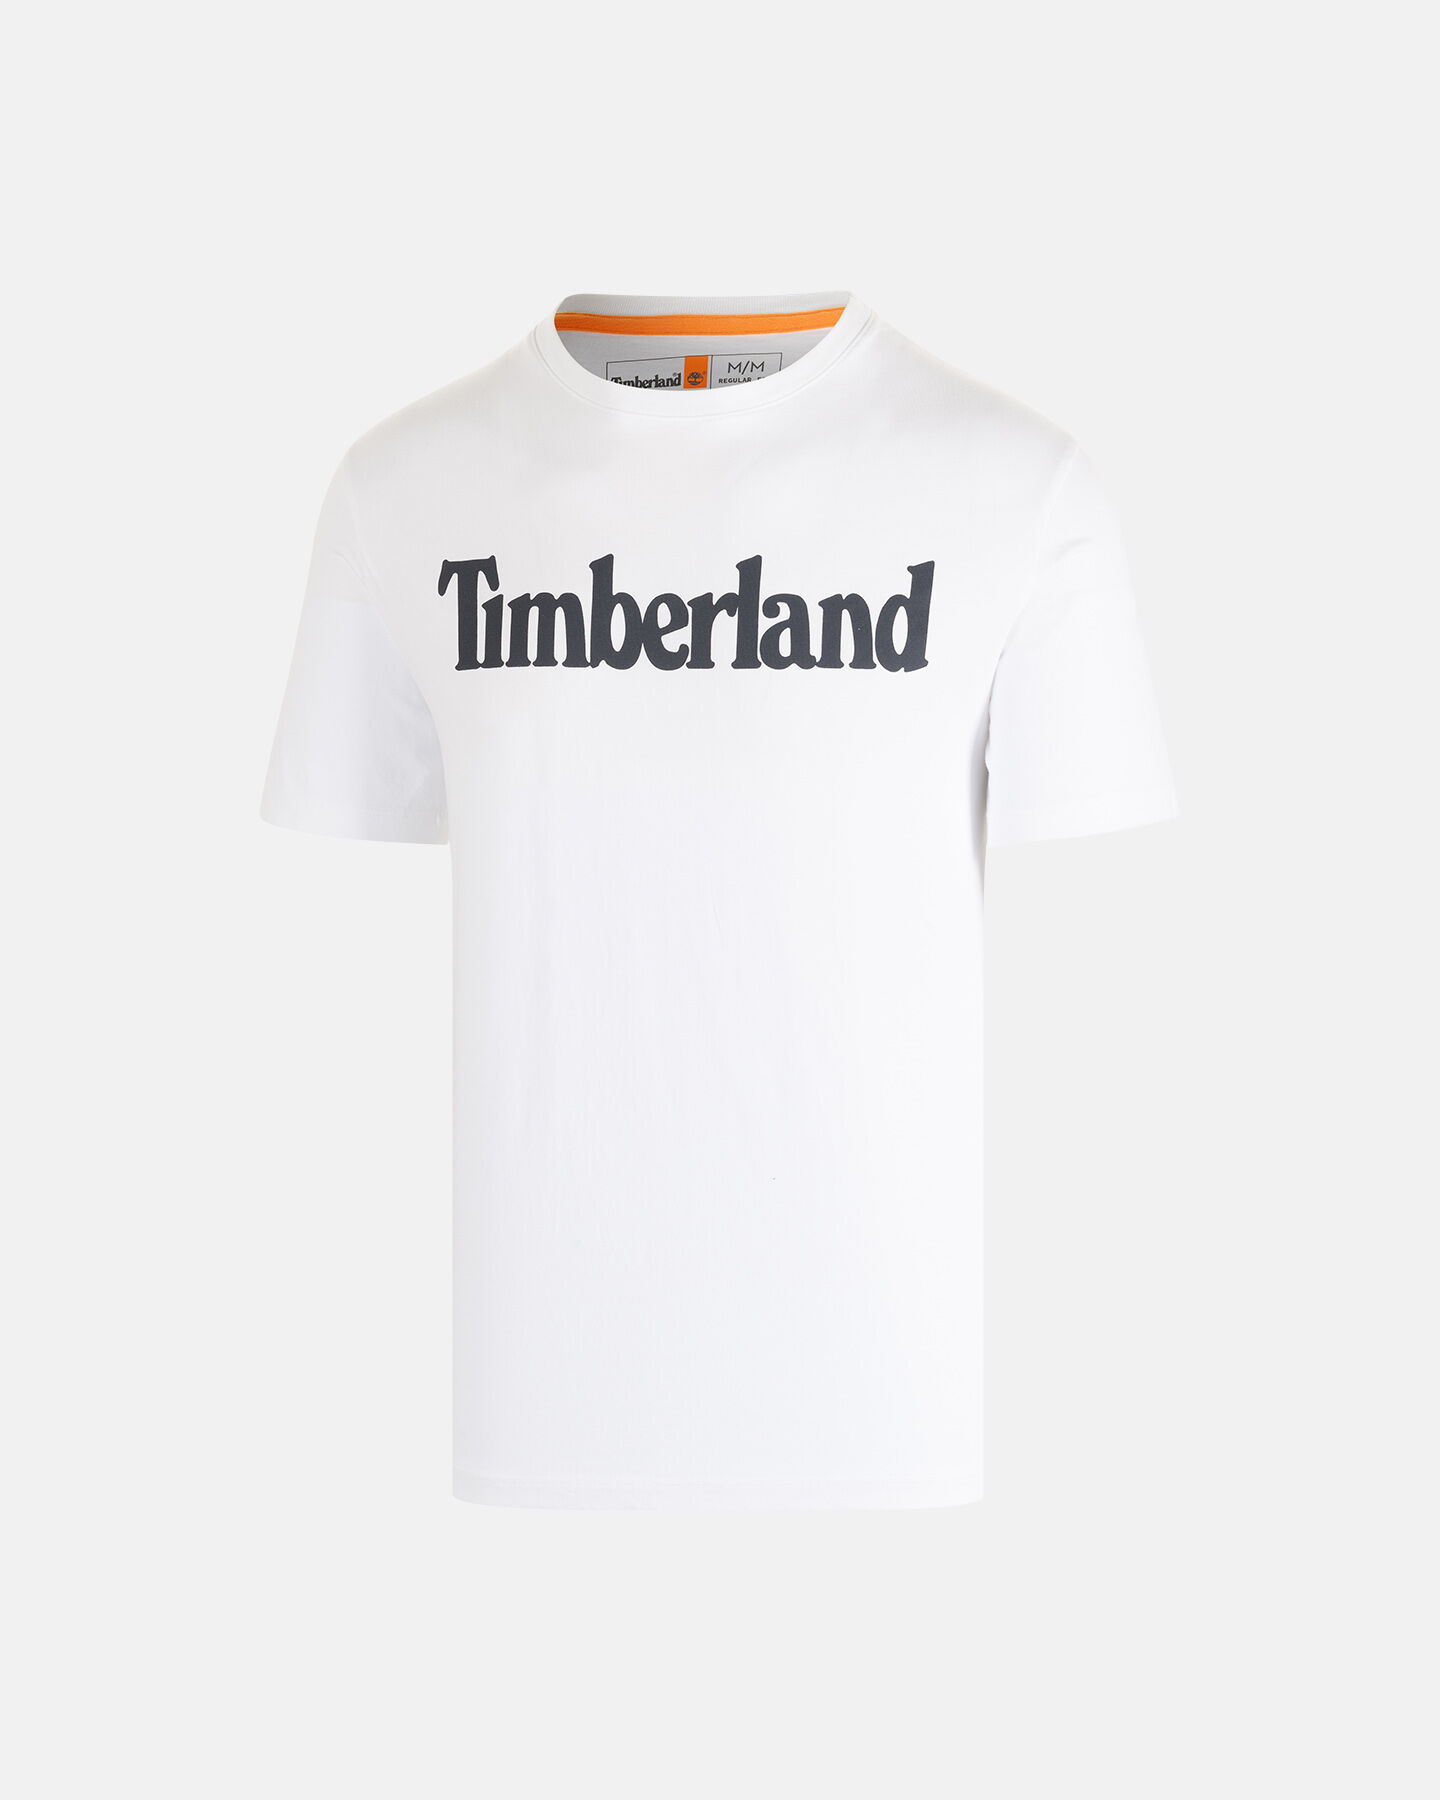  T-Shirt TIMBERLAND KENNEBEC RIVER M S4114725|1001|S scatto 0